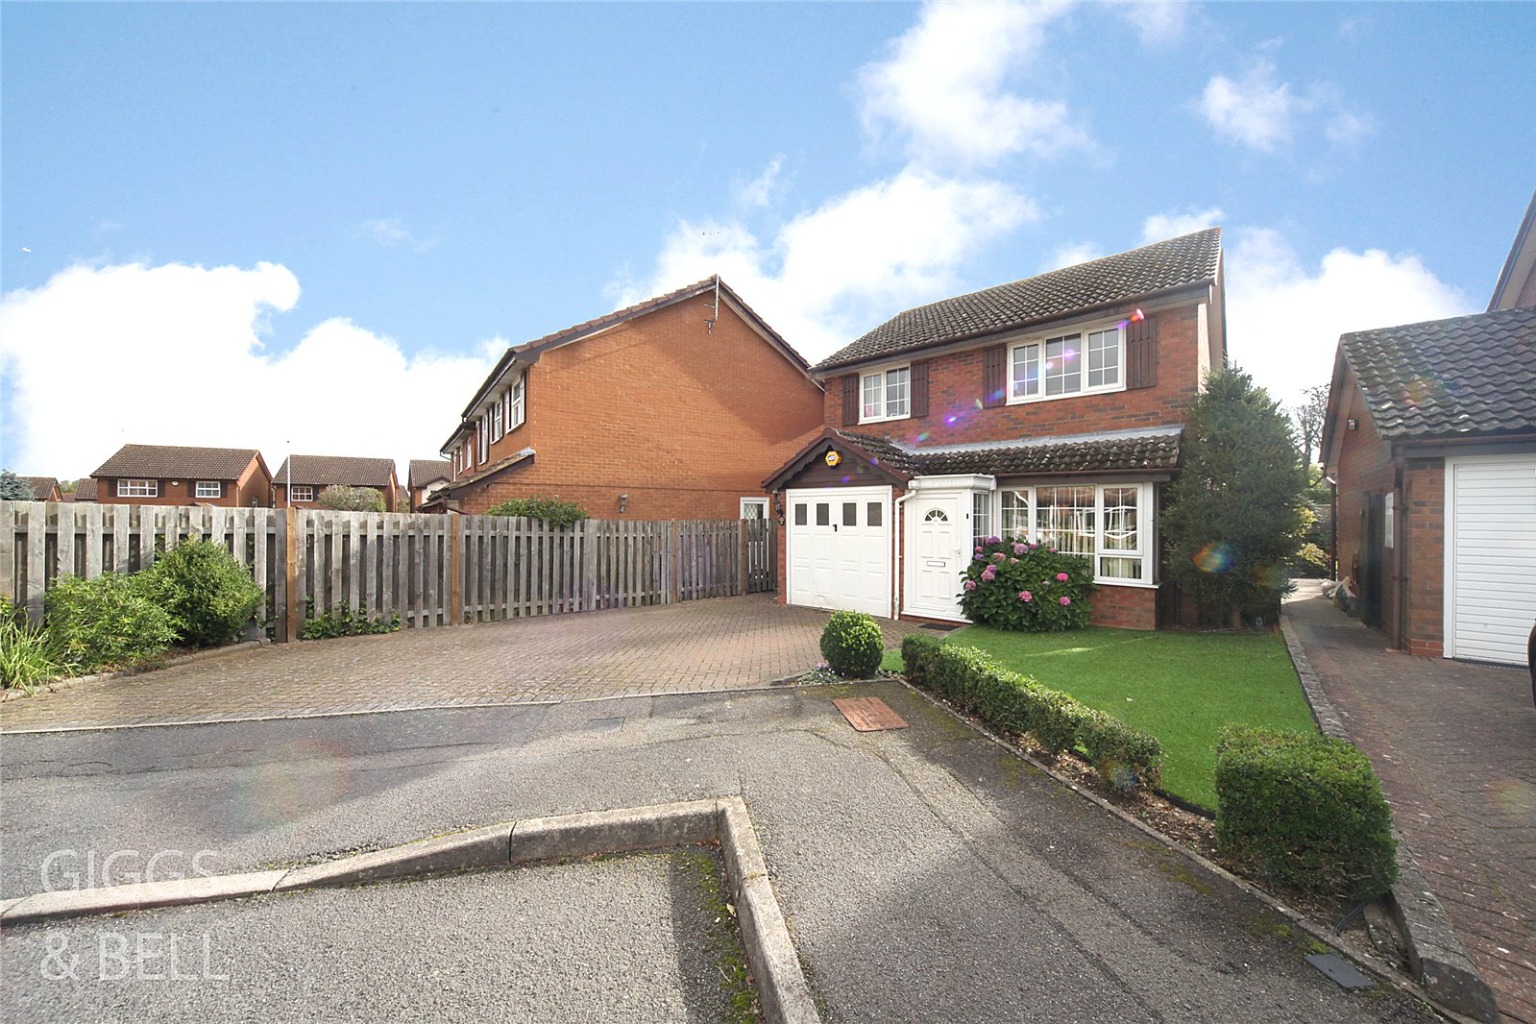 3 bed detached house for sale in Ames Close, Luton, LU3 